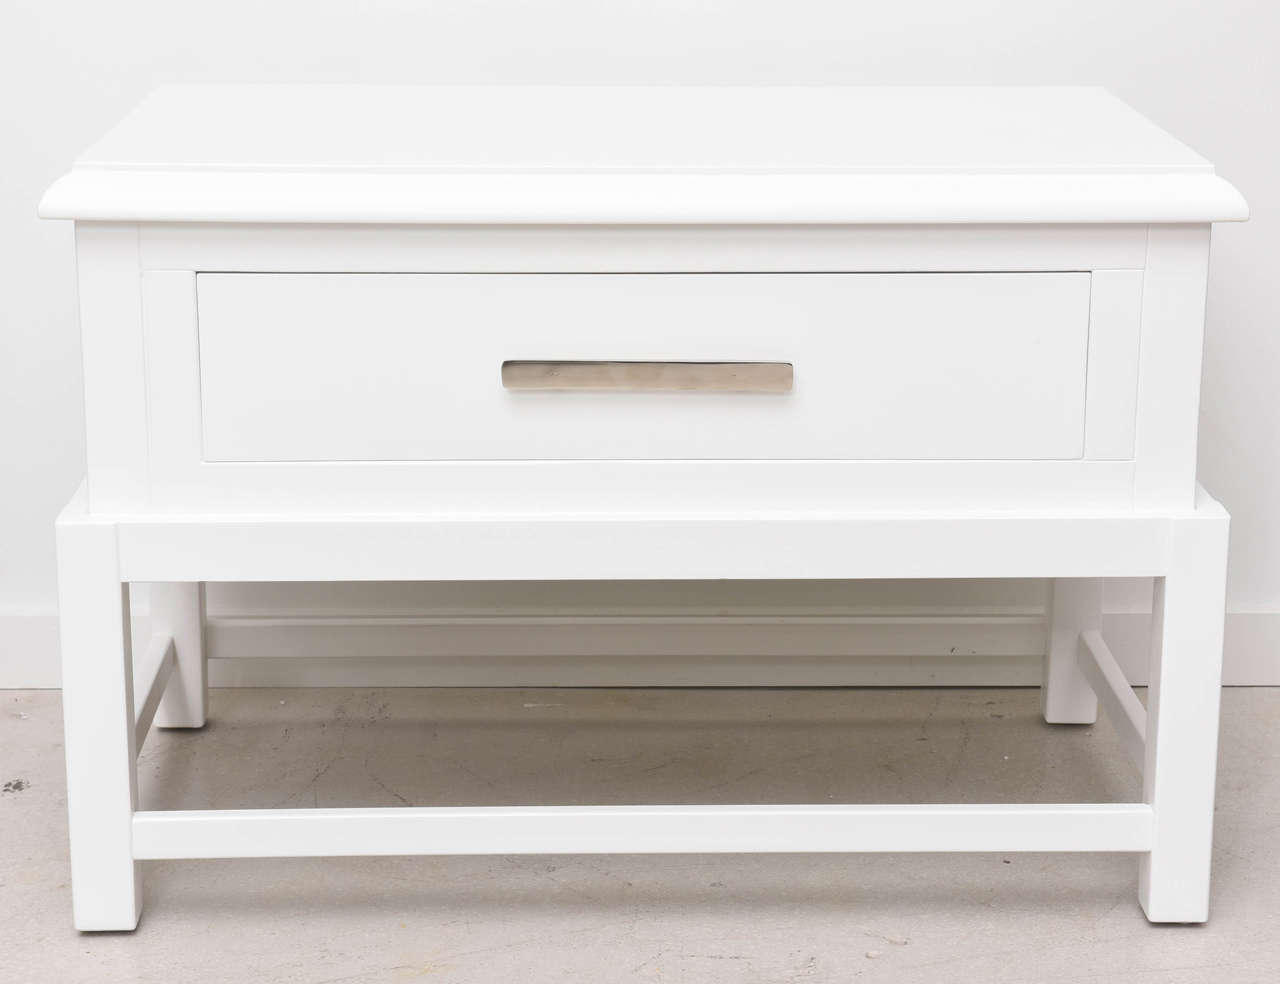 Pair of satin white lacquered bedsides with a single large drawer and nickel hardware.